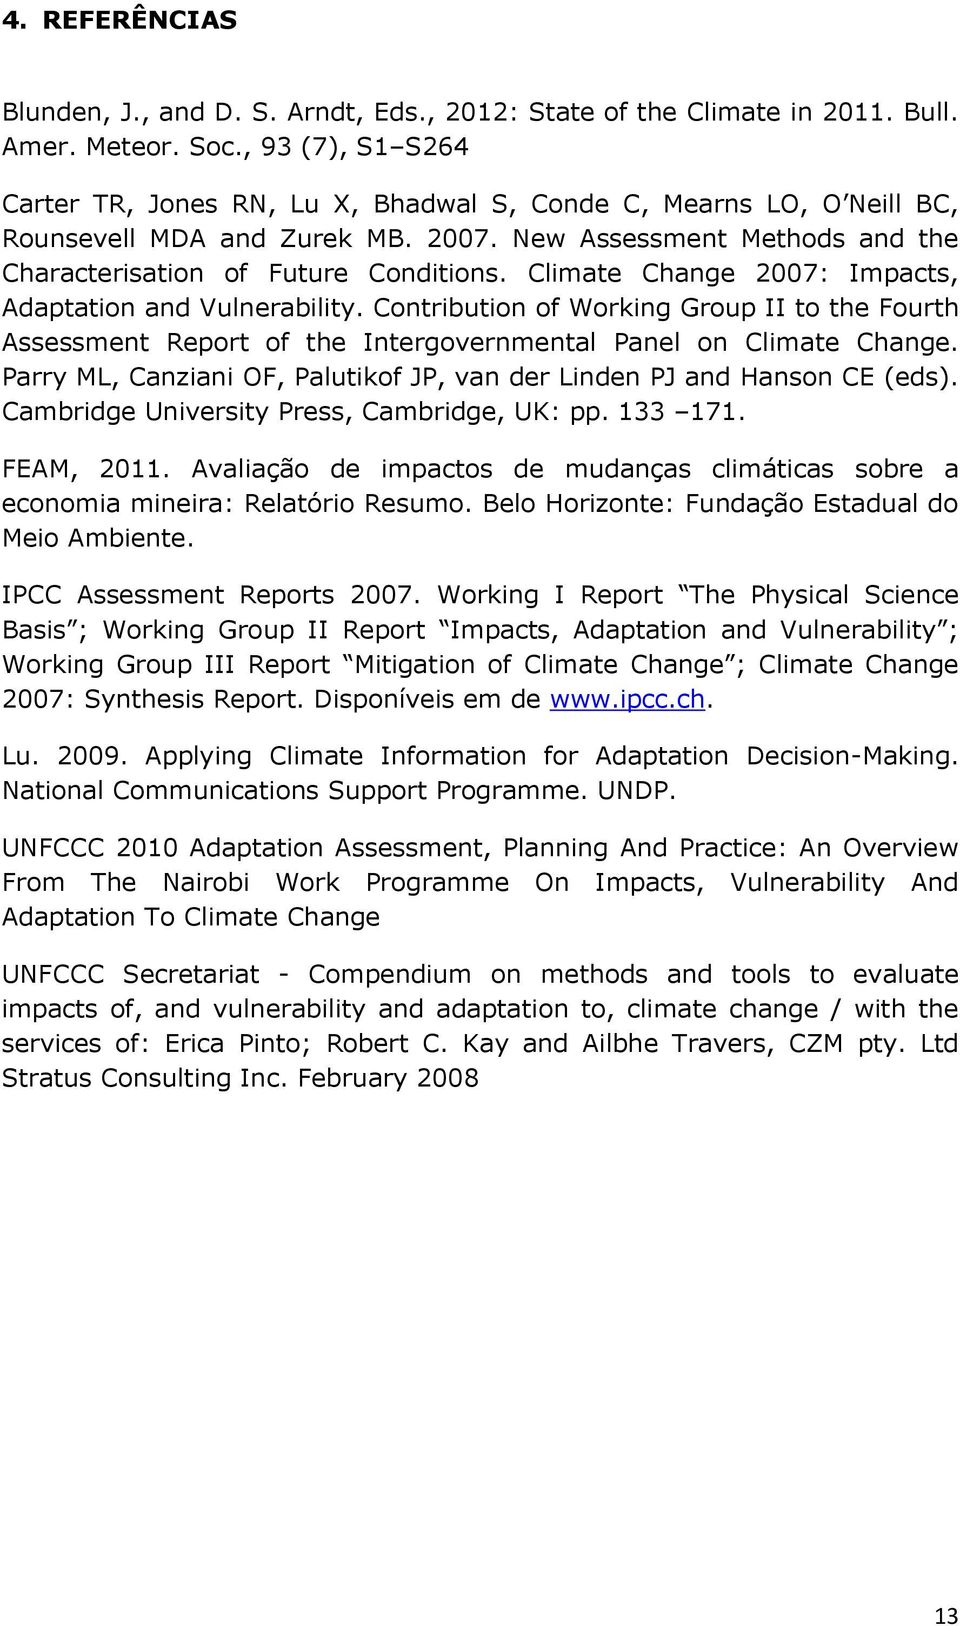 Climate Change 2007: Impacts, Adaptation and Vulnerability. Contribution of Working Group II to the Fourth Assessment Report of the Intergovernmental Panel on Climate Change.